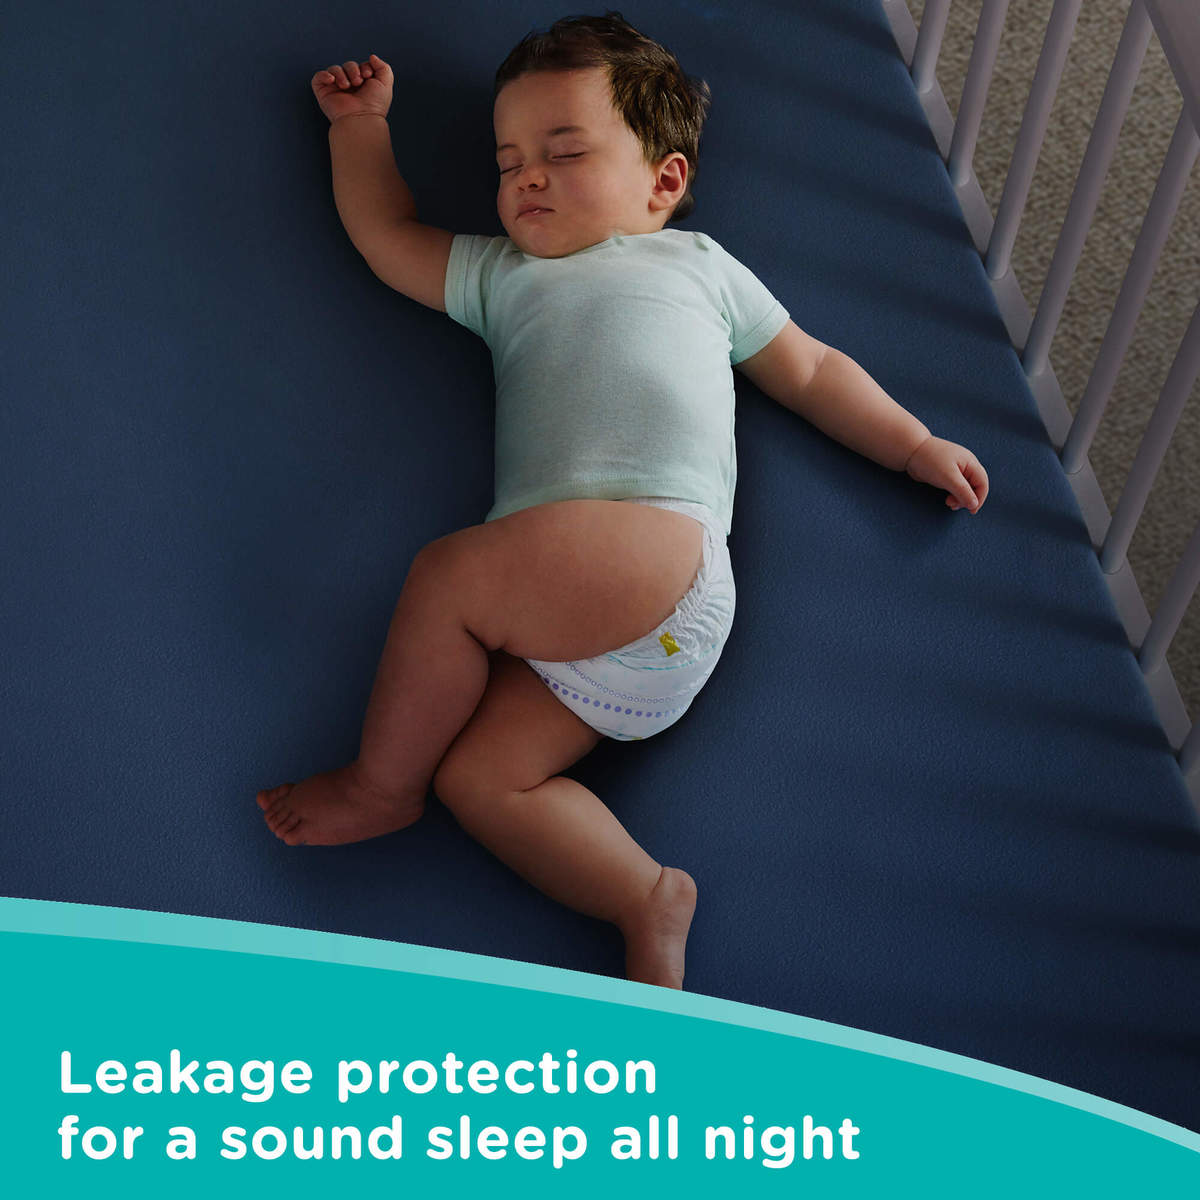 pampers sleep active baby dry